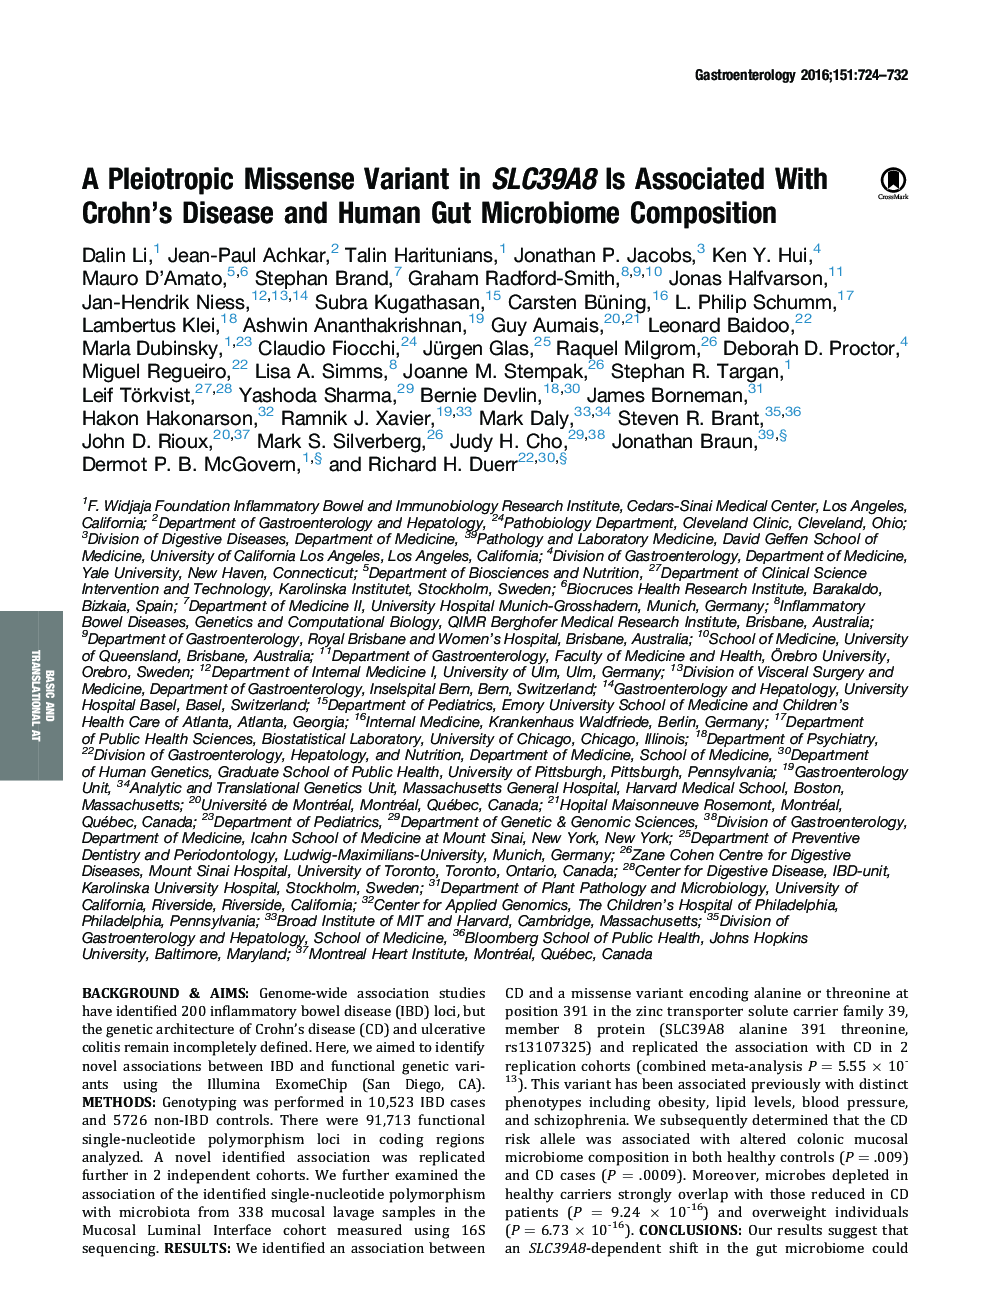 A Pleiotropic Missense Variant in SLC39A8 Is Associated With Crohn’s Disease and Human Gut Microbiome Composition 